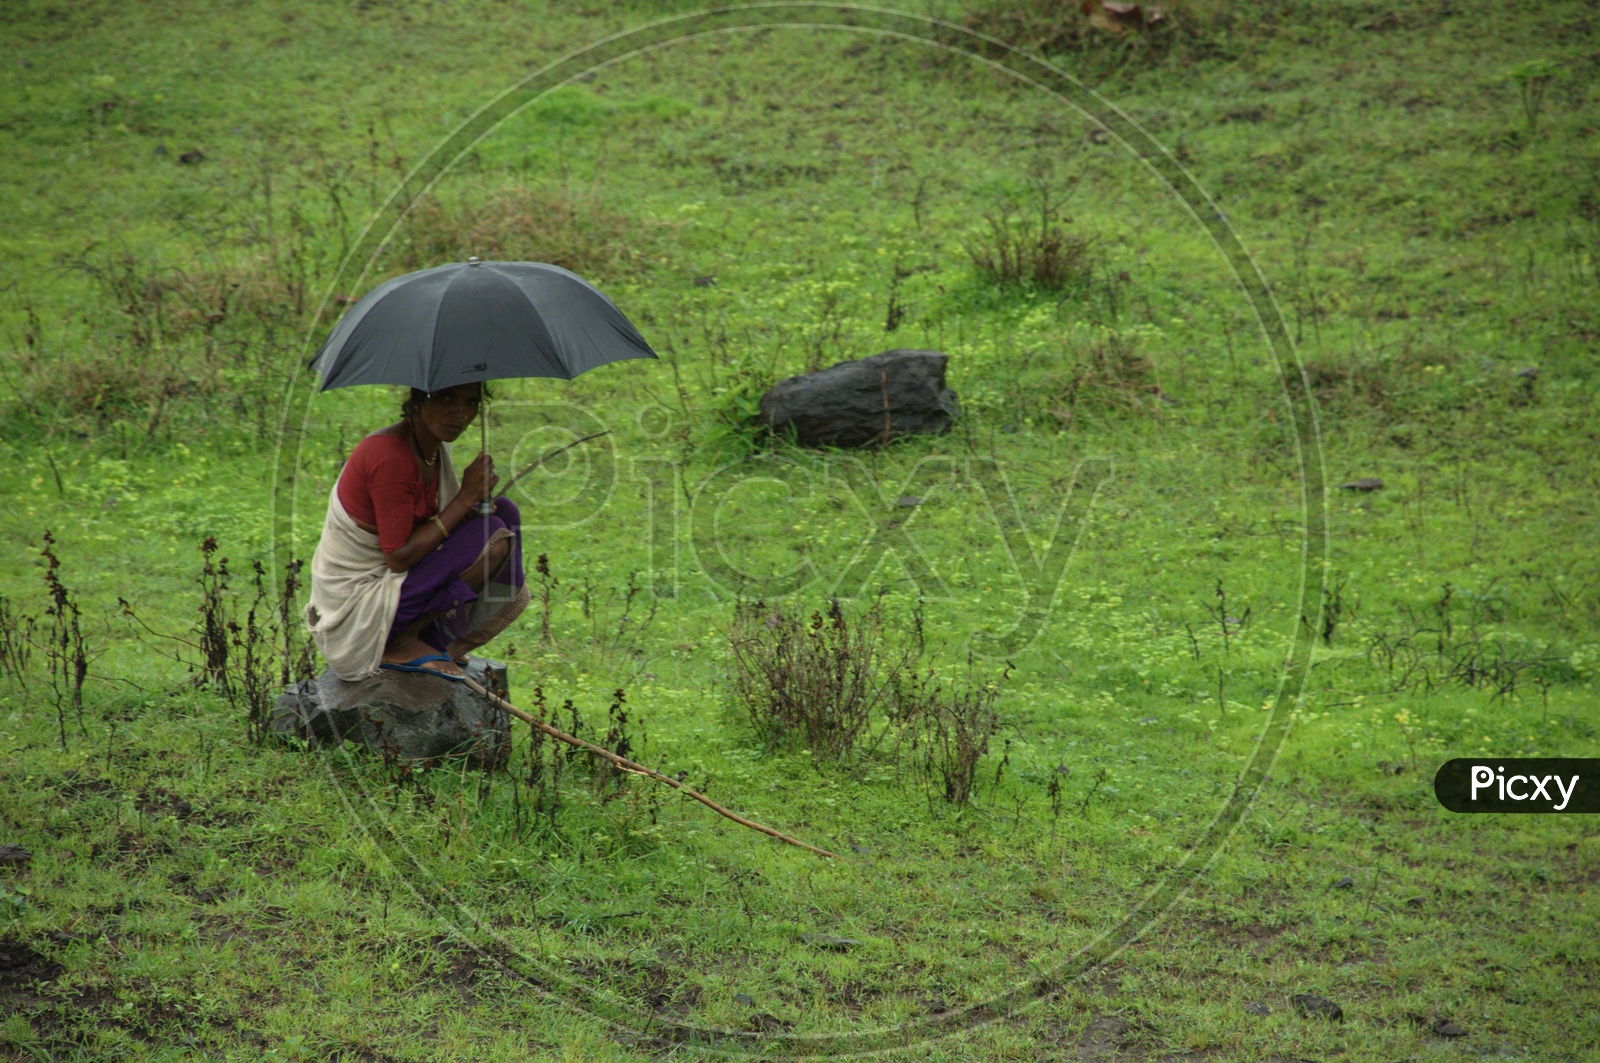 South indian Rural woman with umbrella